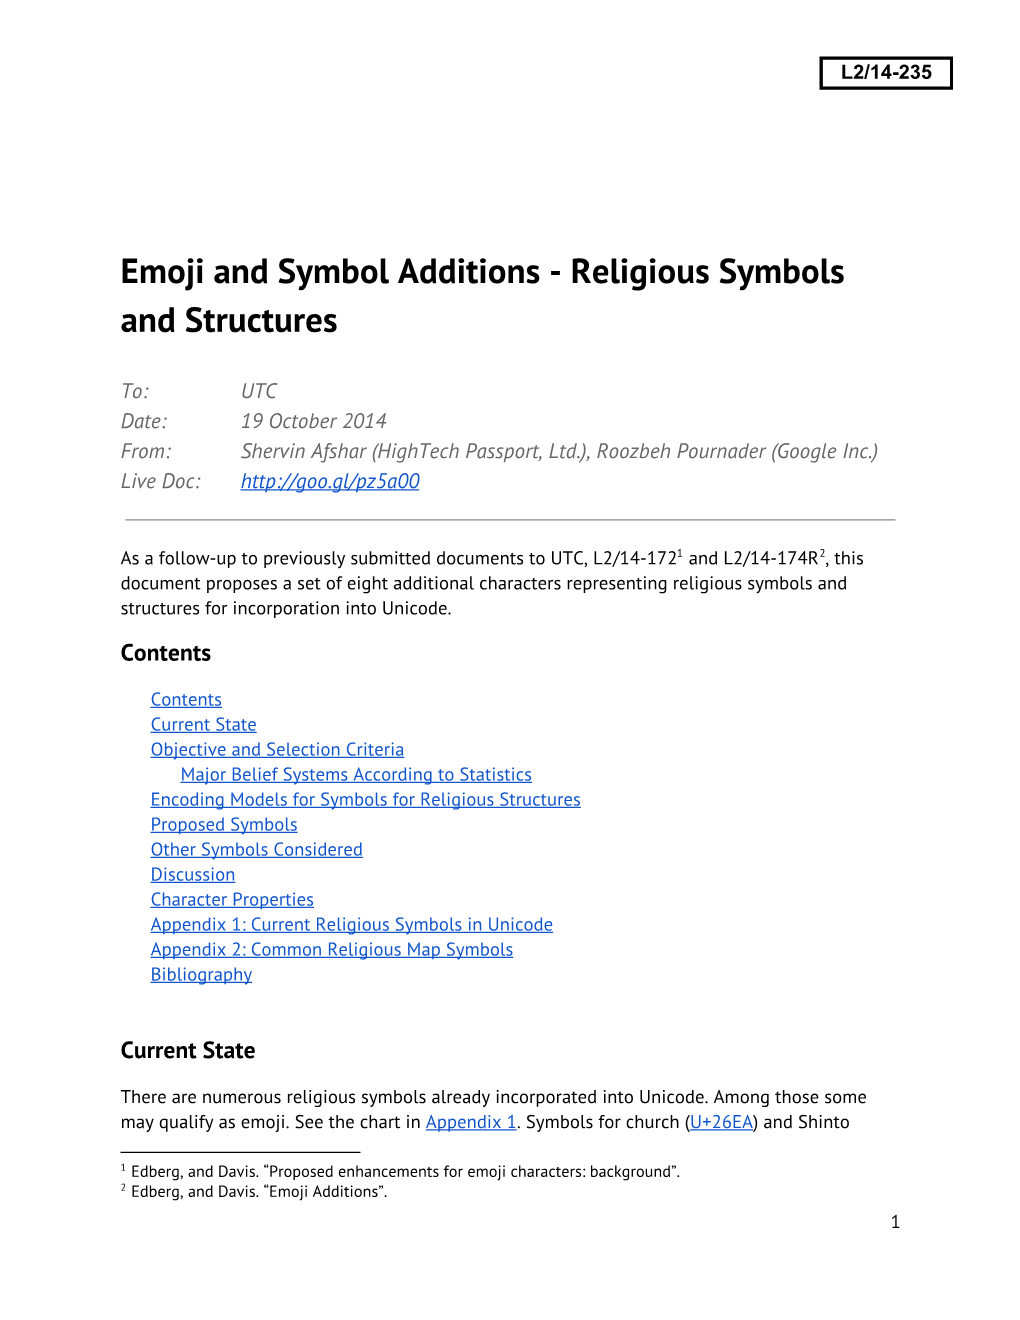 Emoji and Symbol Additions - Religious Symbols and Structures